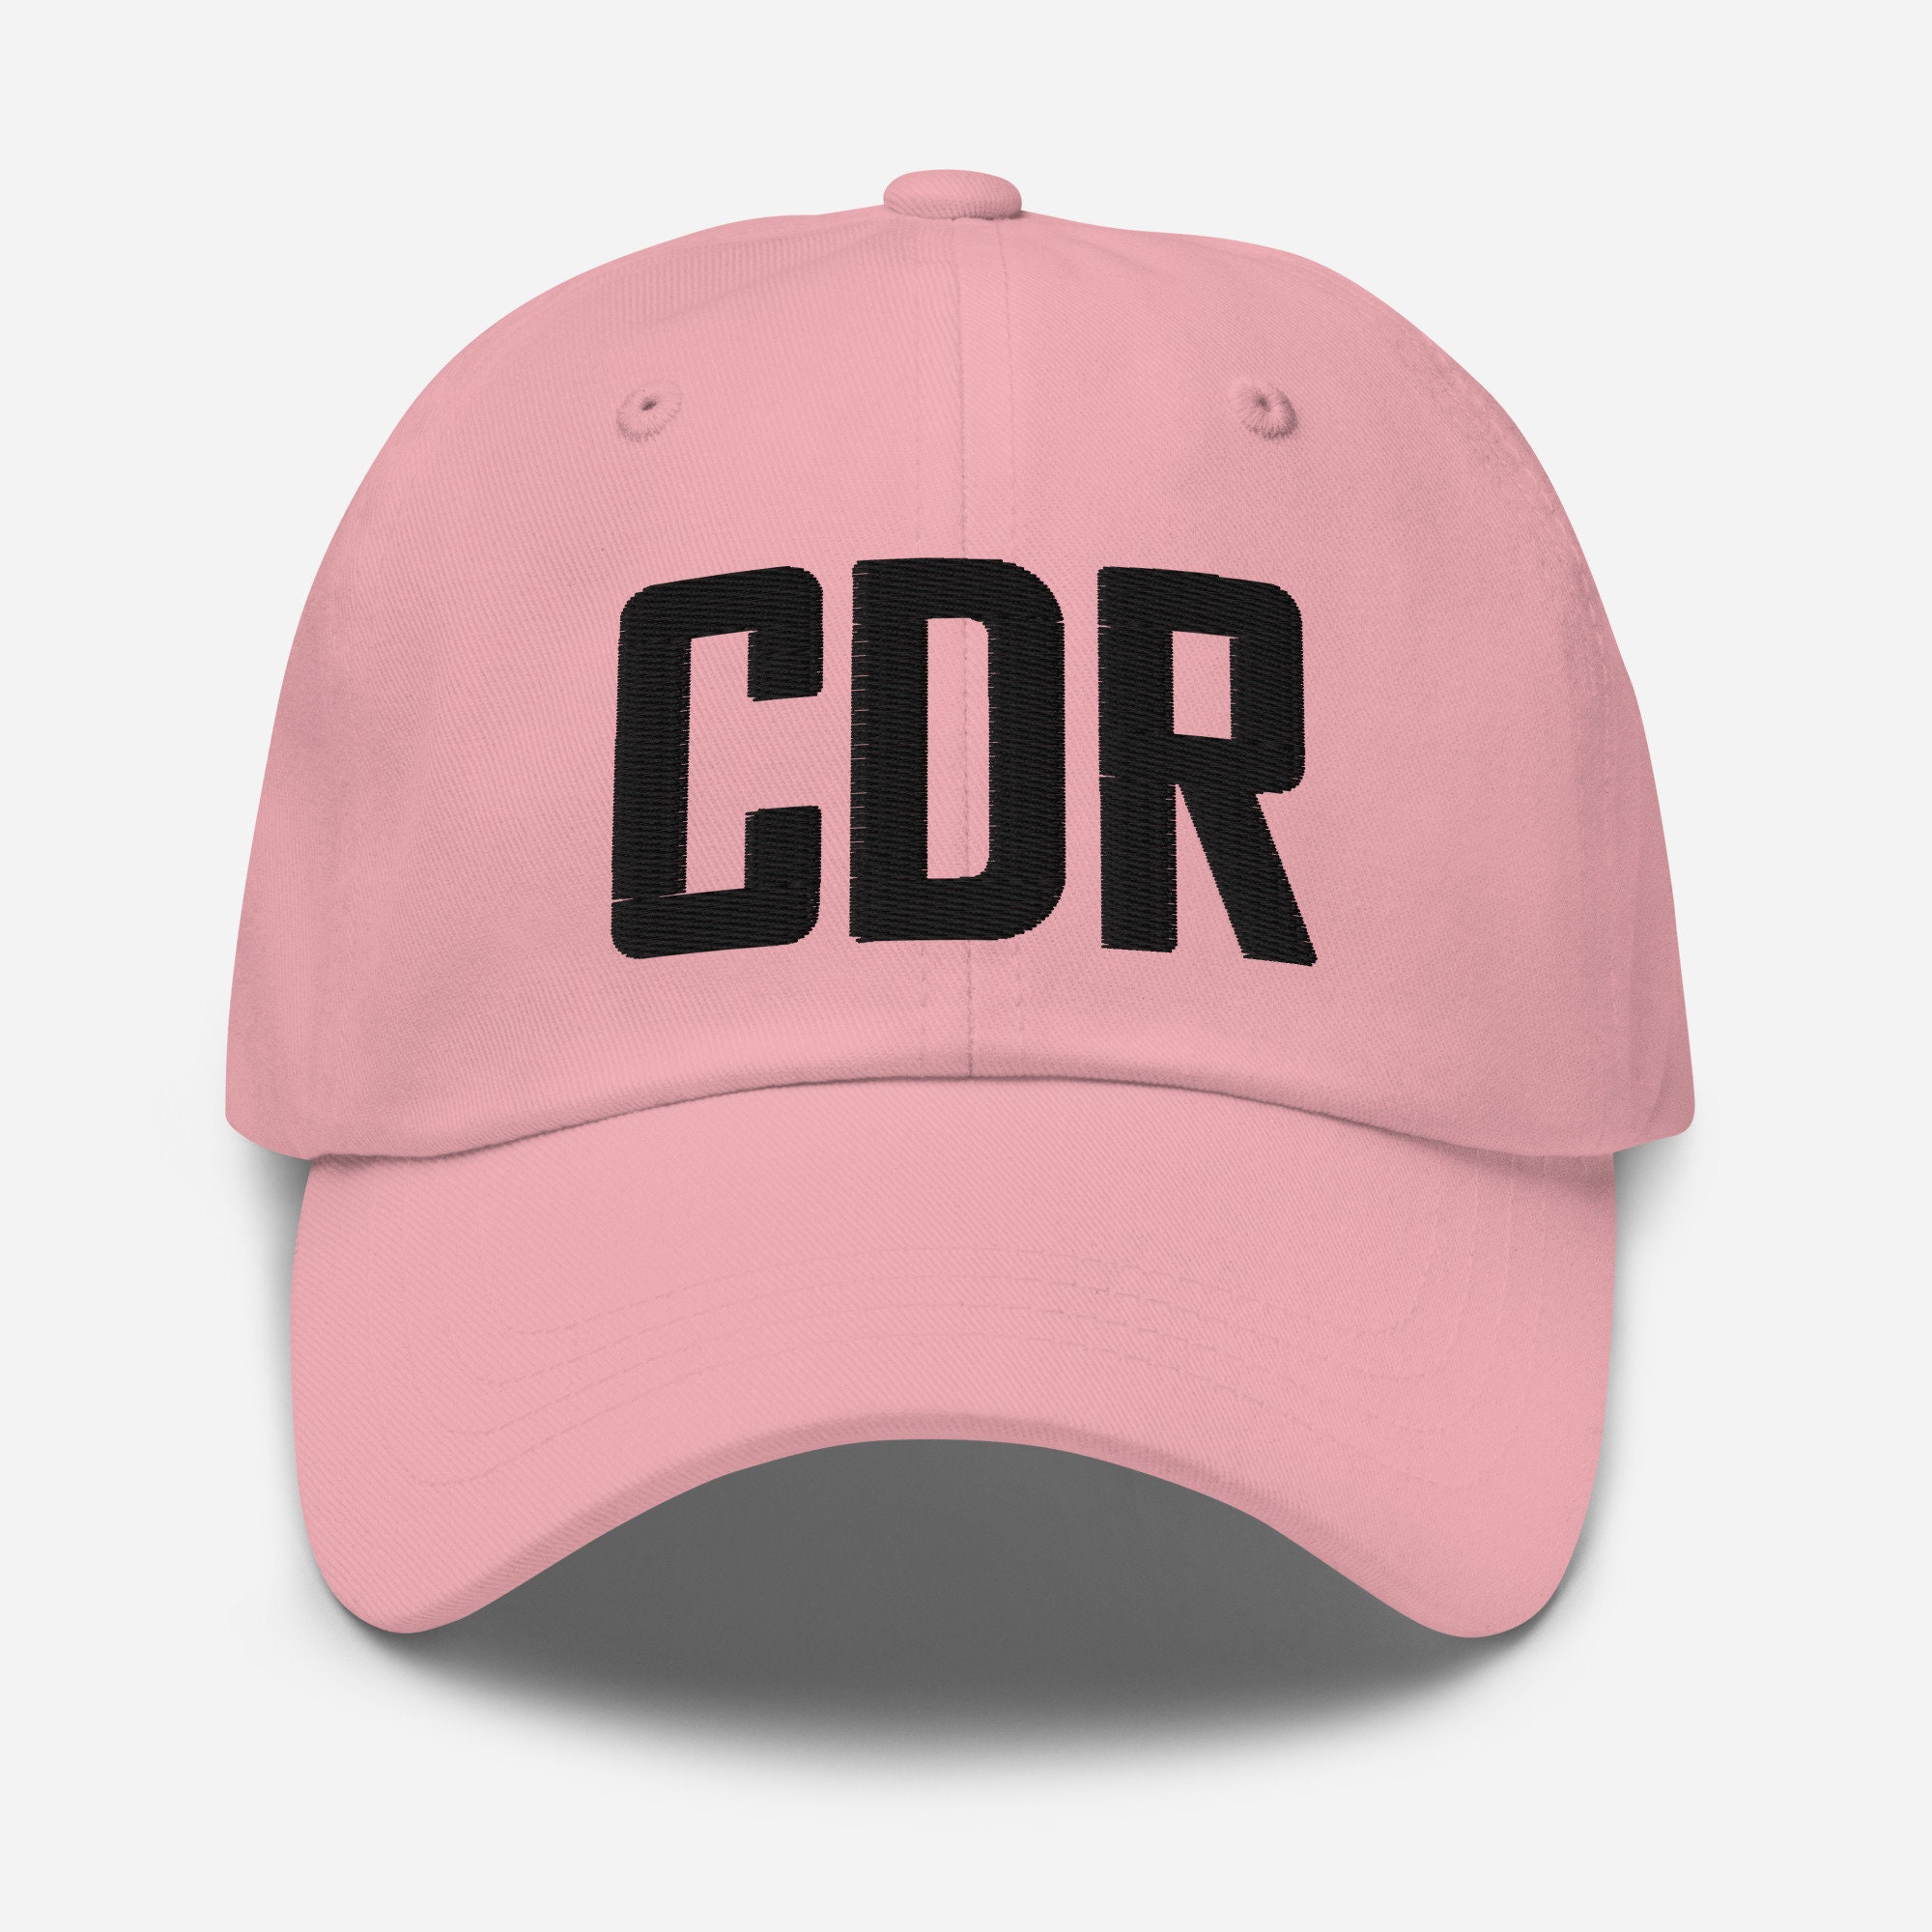 CDR Airport Code Hat Embroidered Hat Dad Hat Chadron Nebraska picture photo picture